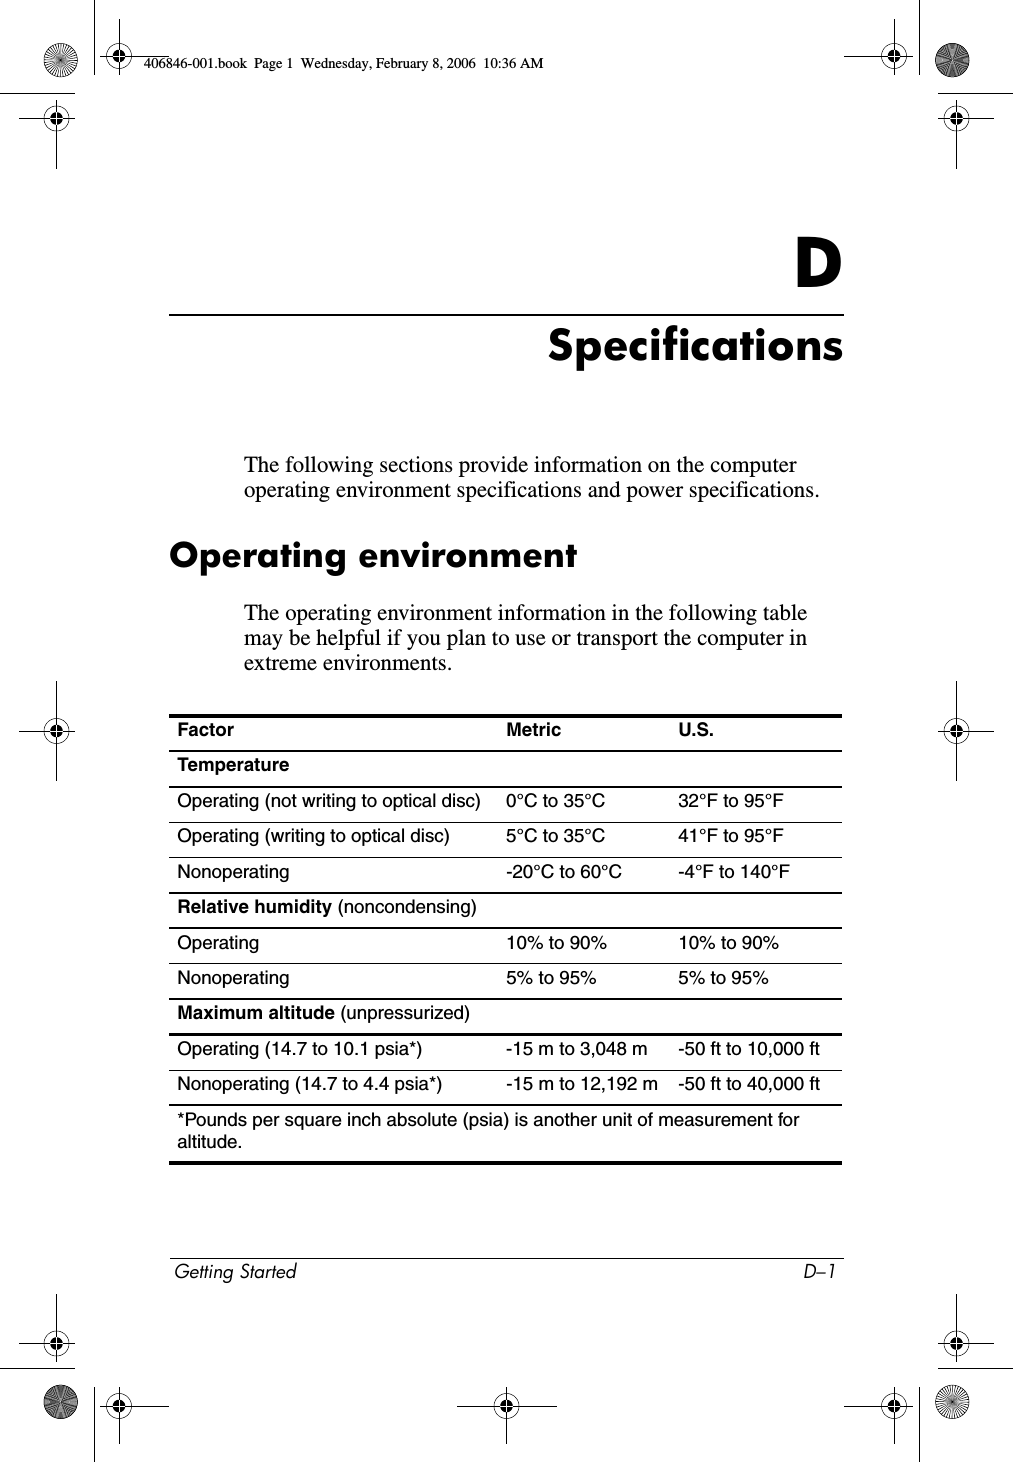 Getting Started D–1DSpecificationsThe following sections provide information on the computer operating environment specifications and power specifications.Operating environmentThe operating environment information in the following table may be helpful if you plan to use or transport the computer in extreme environments.Factor Metric U.S.TemperatureOperating (not writing to optical disc) 0°C to 35°C 32°F to 95°FOperating (writing to optical disc) 5°C to 35°C 41°F to 95°FNonoperating -20°C to 60°C -4°F to 140°FRelative humidity (noncondensing)Operating 10% to 90% 10% to 90%Nonoperating 5% to 95% 5% to 95%Maximum altitude (unpressurized)Operating (14.7 to 10.1 psia*) -15 m to 3,048 m -50 ft to 10,000 ftNonoperating (14.7 to 4.4 psia*) -15 m to 12,192 m -50 ft to 40,000 ft*Pounds per square inch absolute (psia) is another unit of measurement for altitude.406846-001.book  Page 1  Wednesday, February 8, 2006  10:36 AM